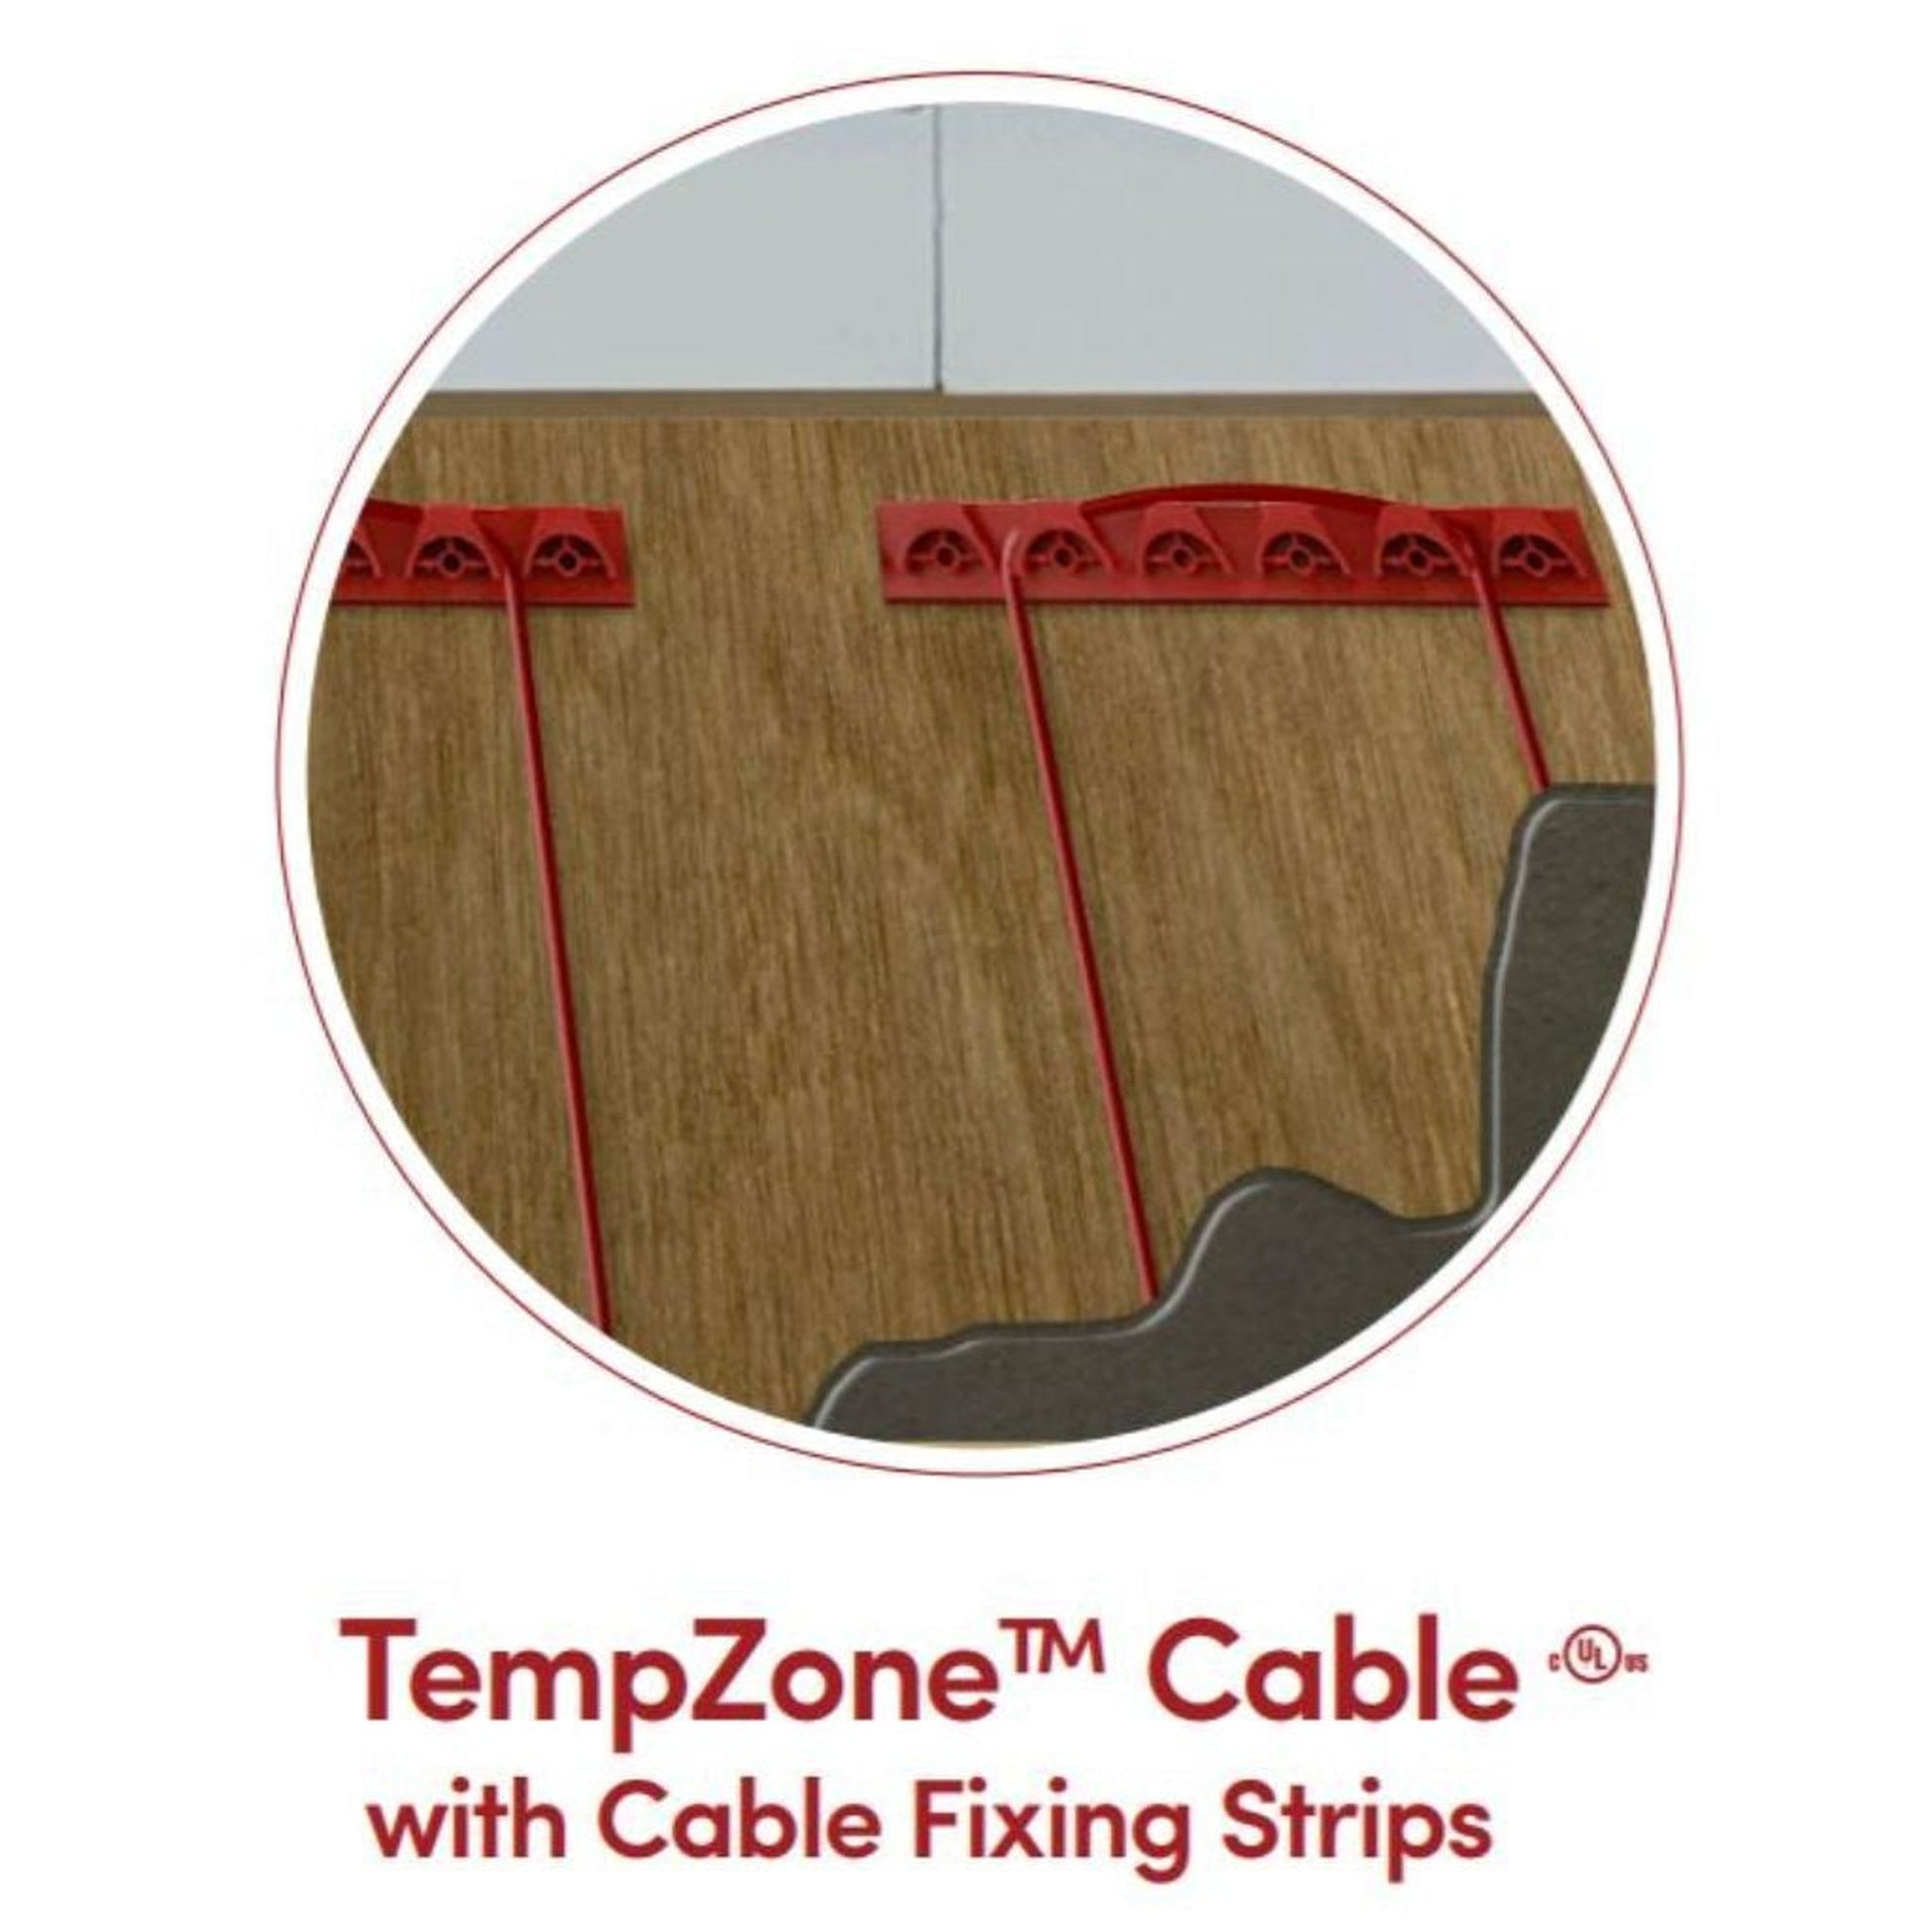 WarmlyYours TempZone Cable 150′ 120V Radiant Floor Heating Cable System Kit With nSpire Touch Programmable Touchscreen Thermostat